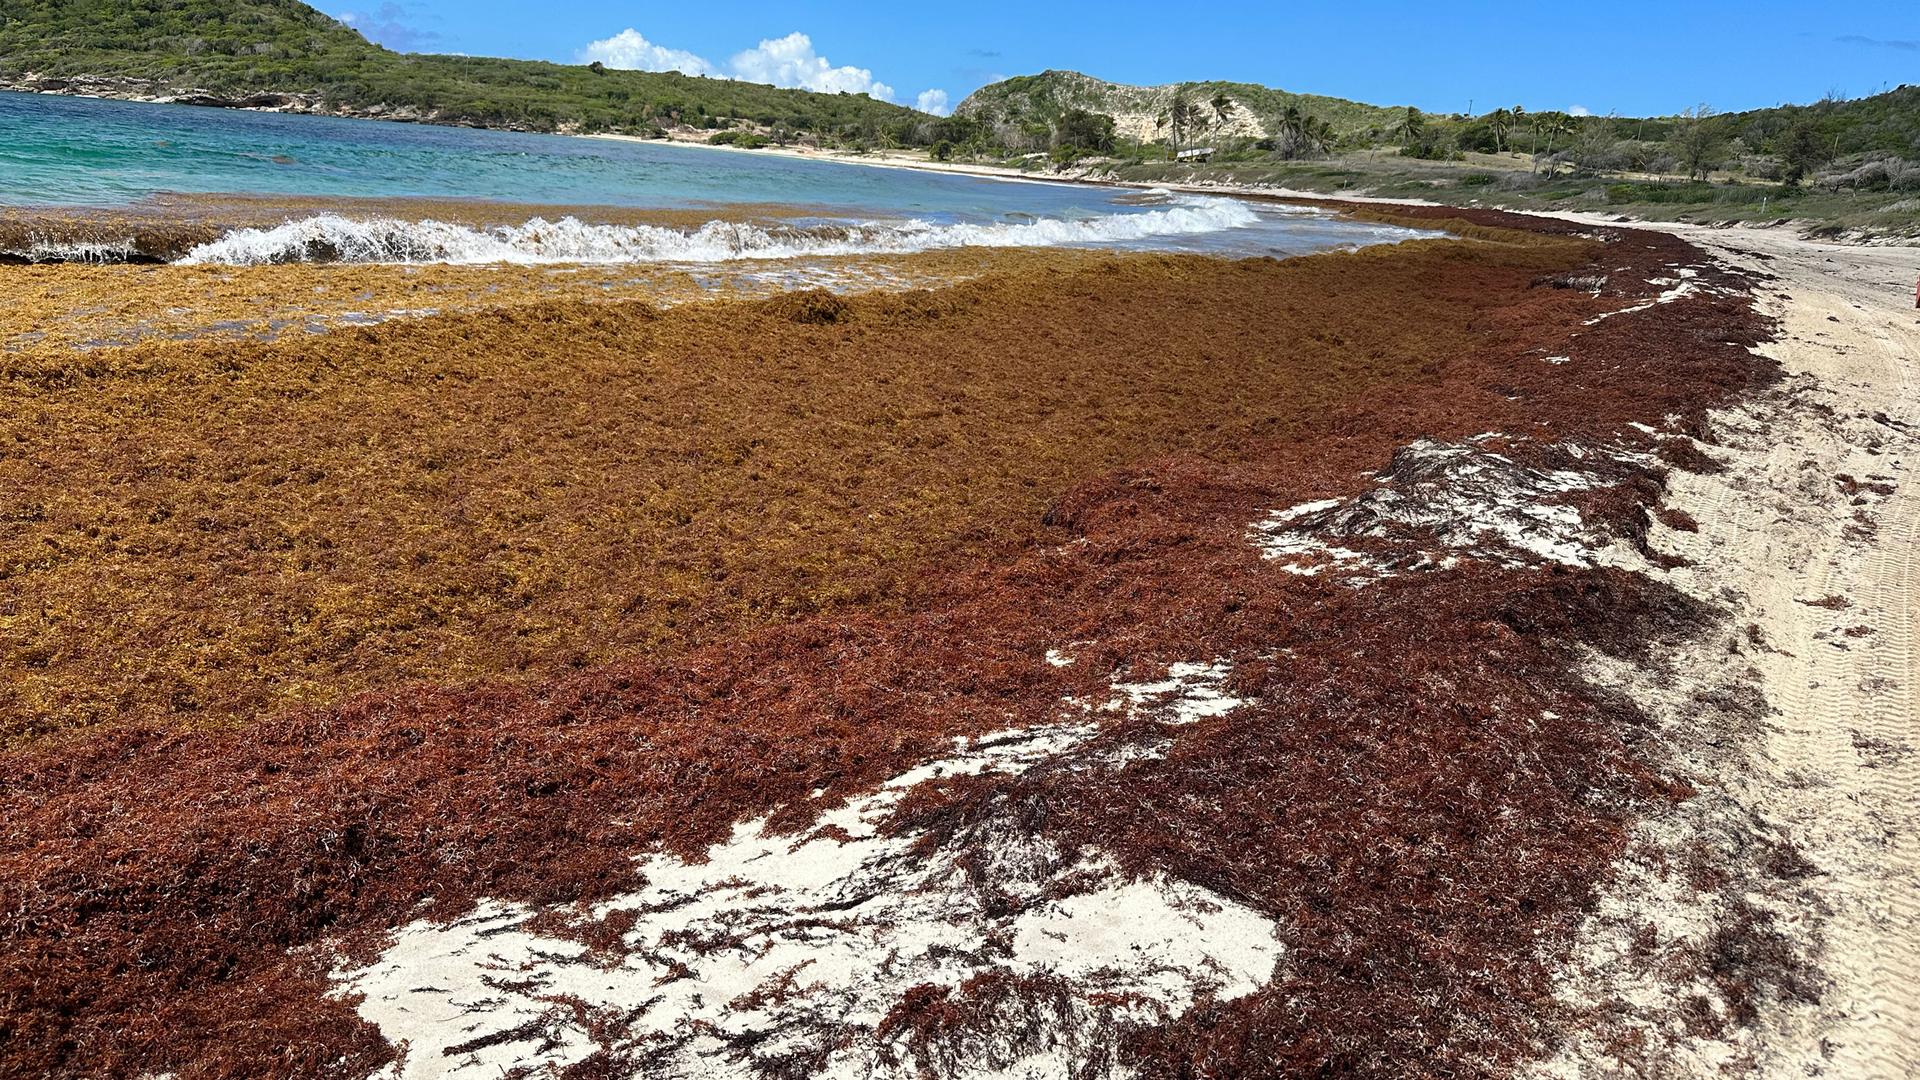 Half Moon Bay is a famous beach in Antigua and Barbuda that is now covered sargassum, a type of large, brown floating seaweed.